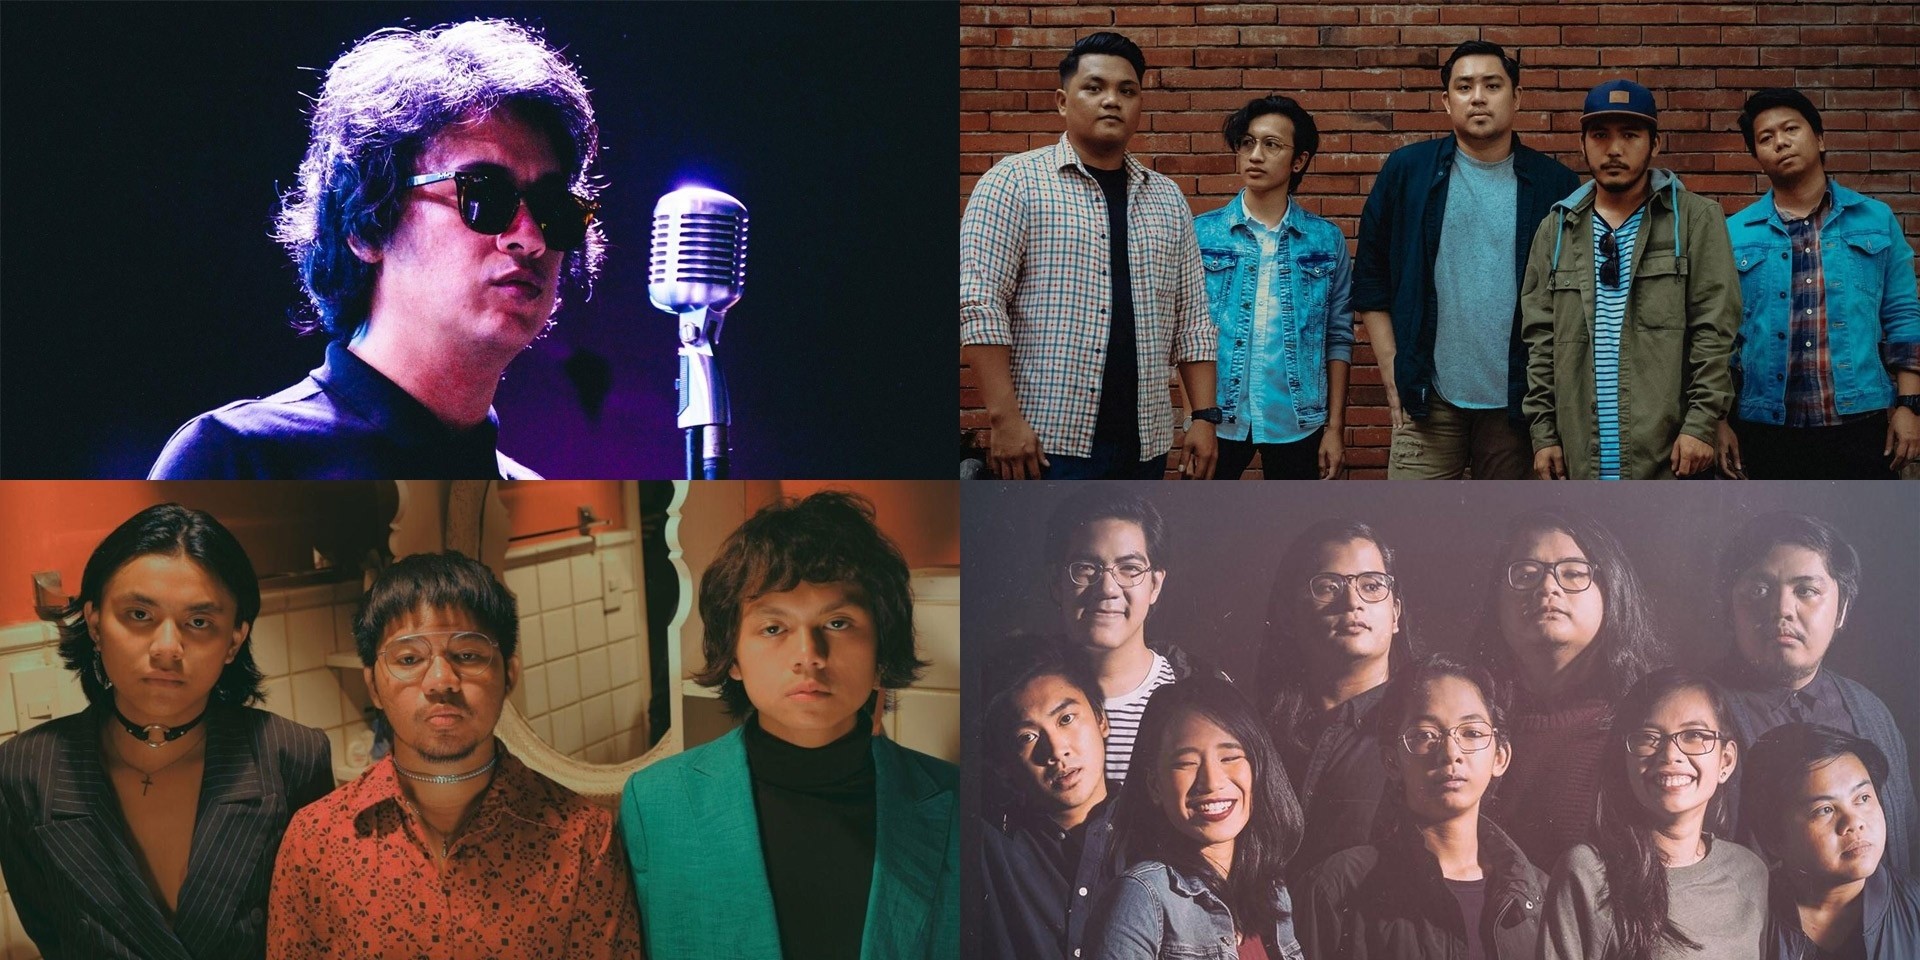 Ely Buendia, December Avenue, IV of Spades, Ben&Ben, and more to perform at Toyota Music Fest